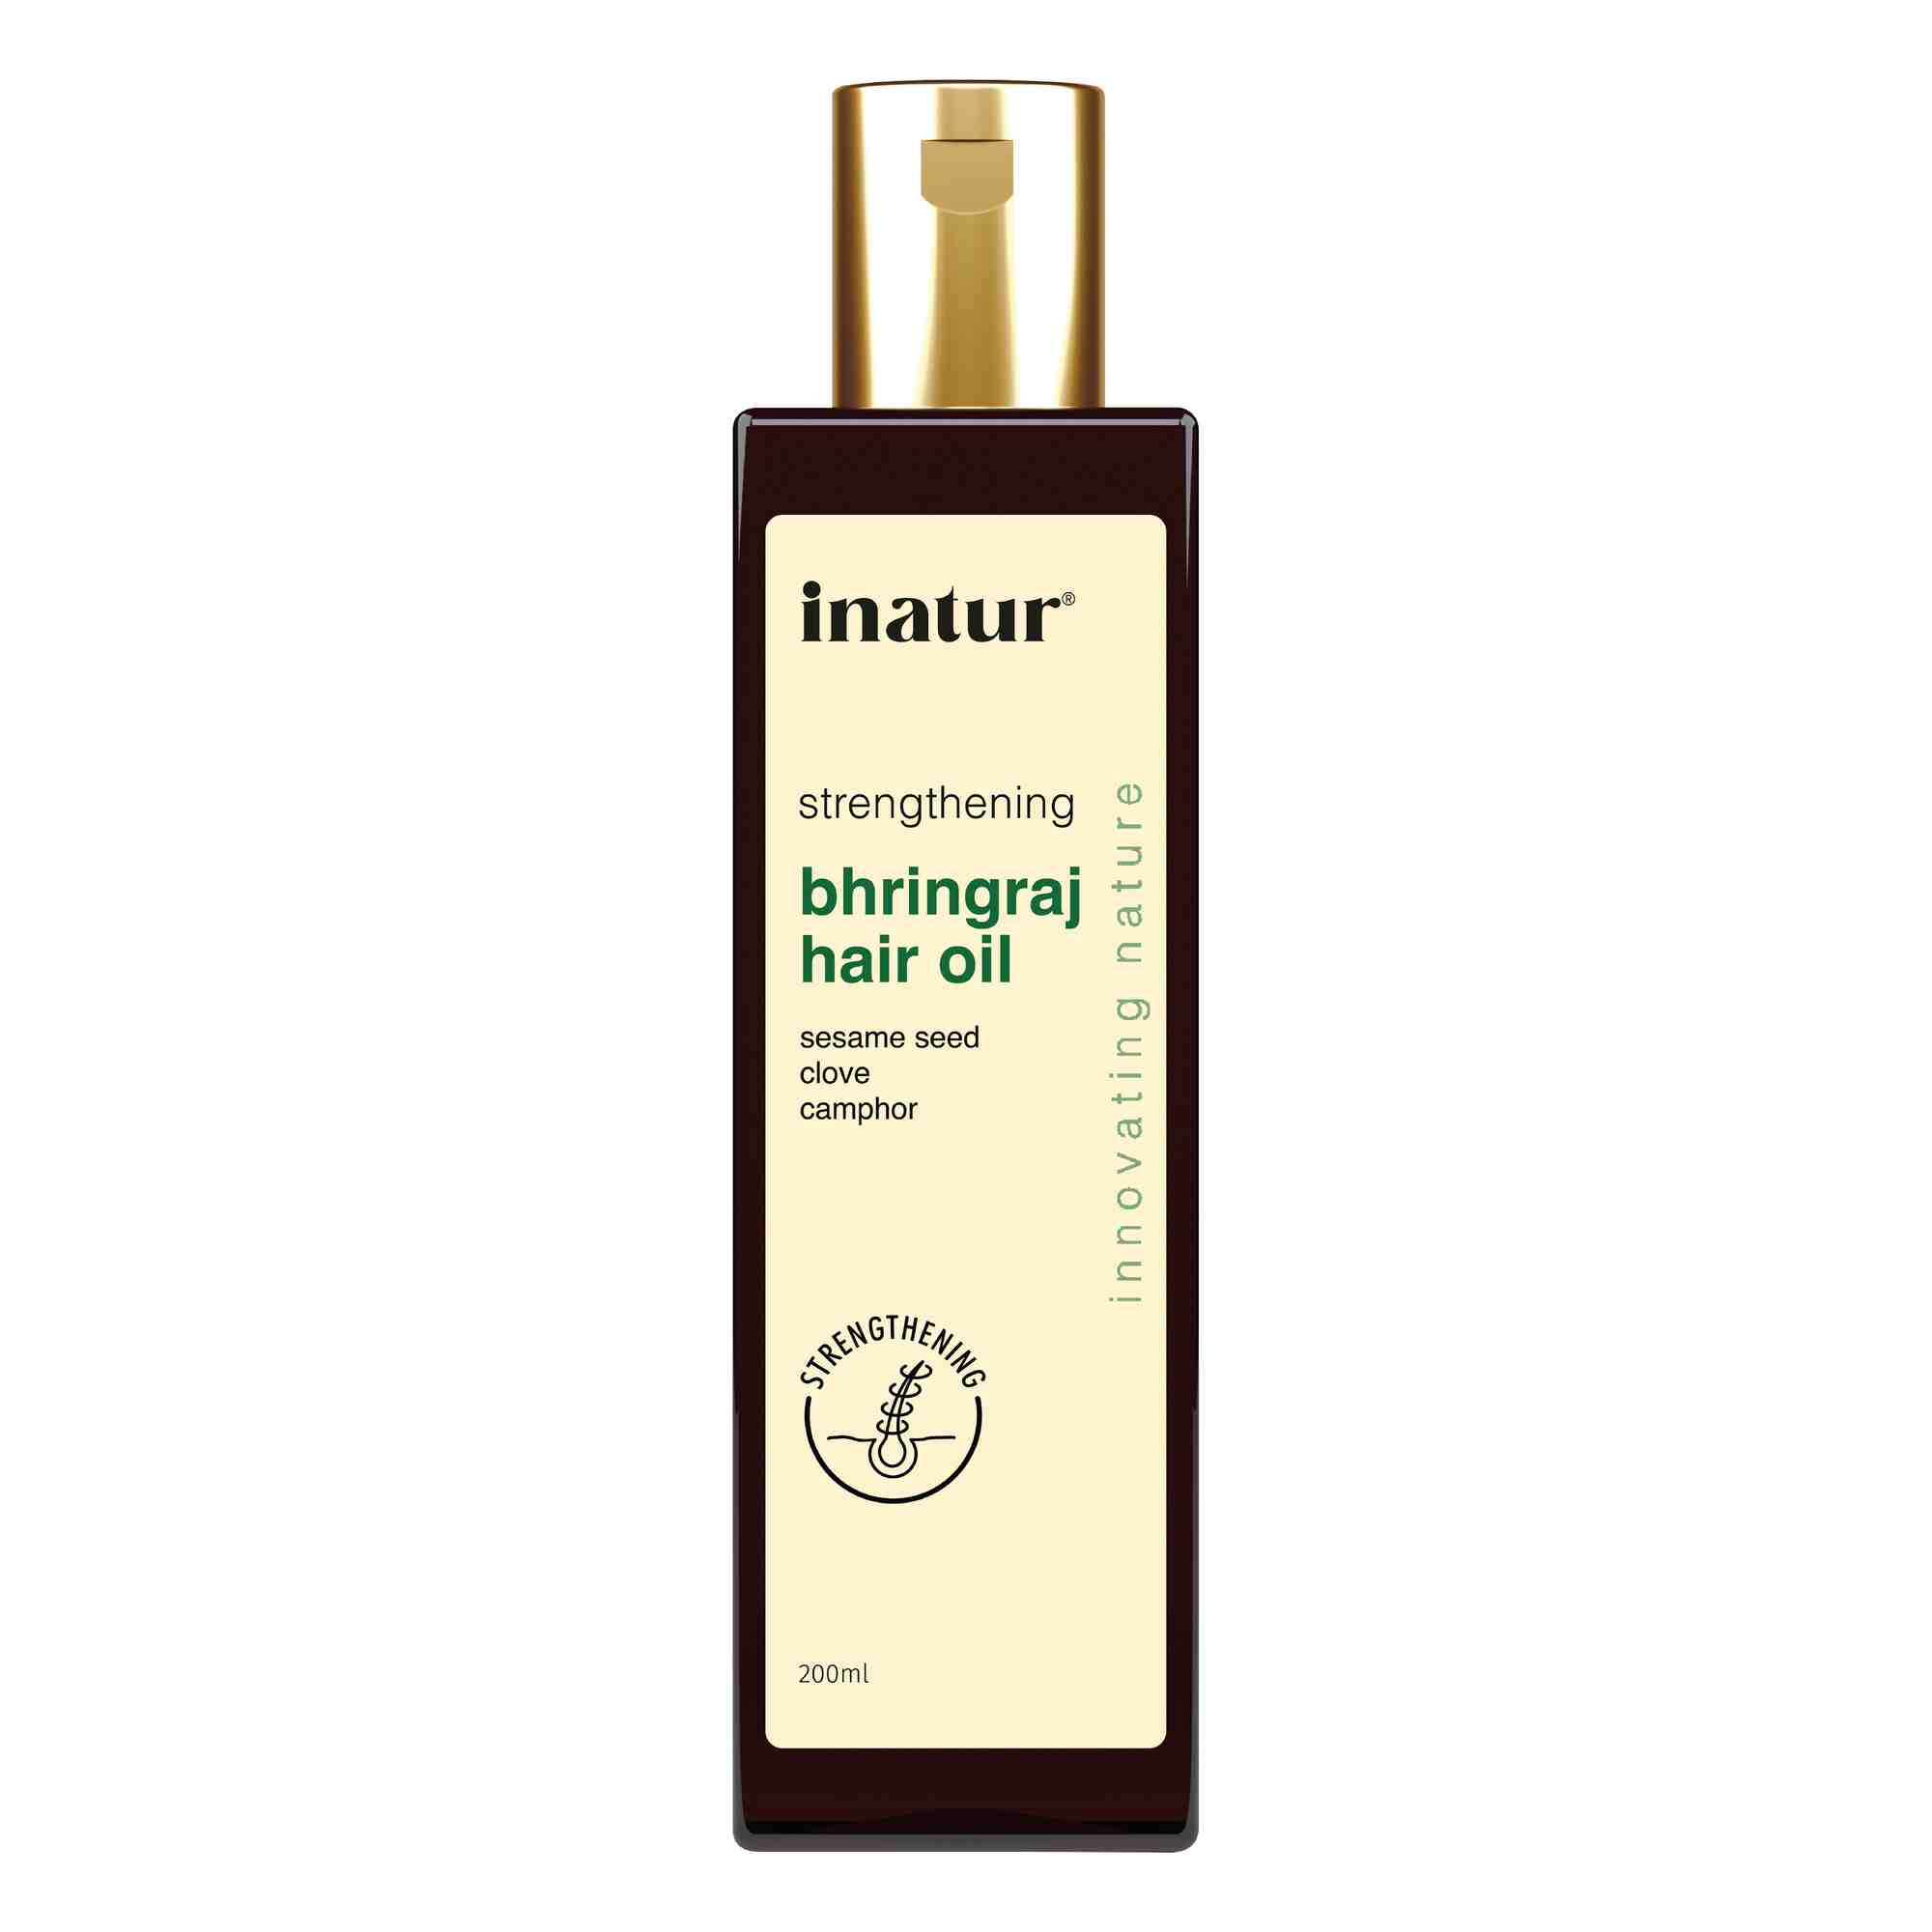 Biotique Bio Bhringraj Fresh Growth Therapeutic Oil: Review, Price –  Vanitynoapologies | Indian Makeup and Beauty Blog